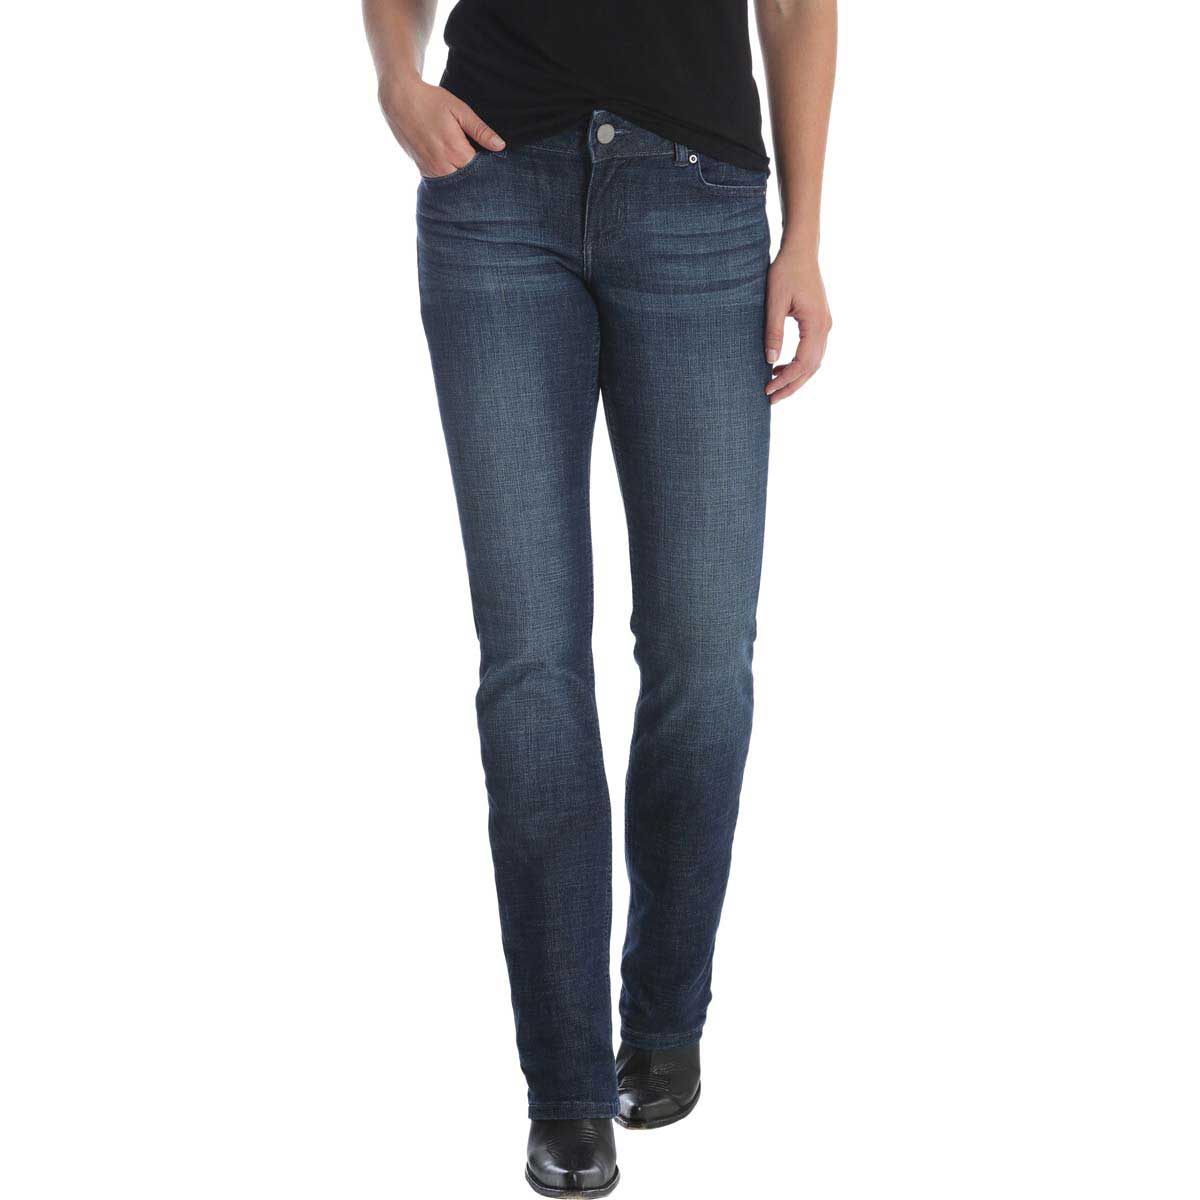 Every Day Straight Leg Womens Jeans Wrangler - Womens Clothing